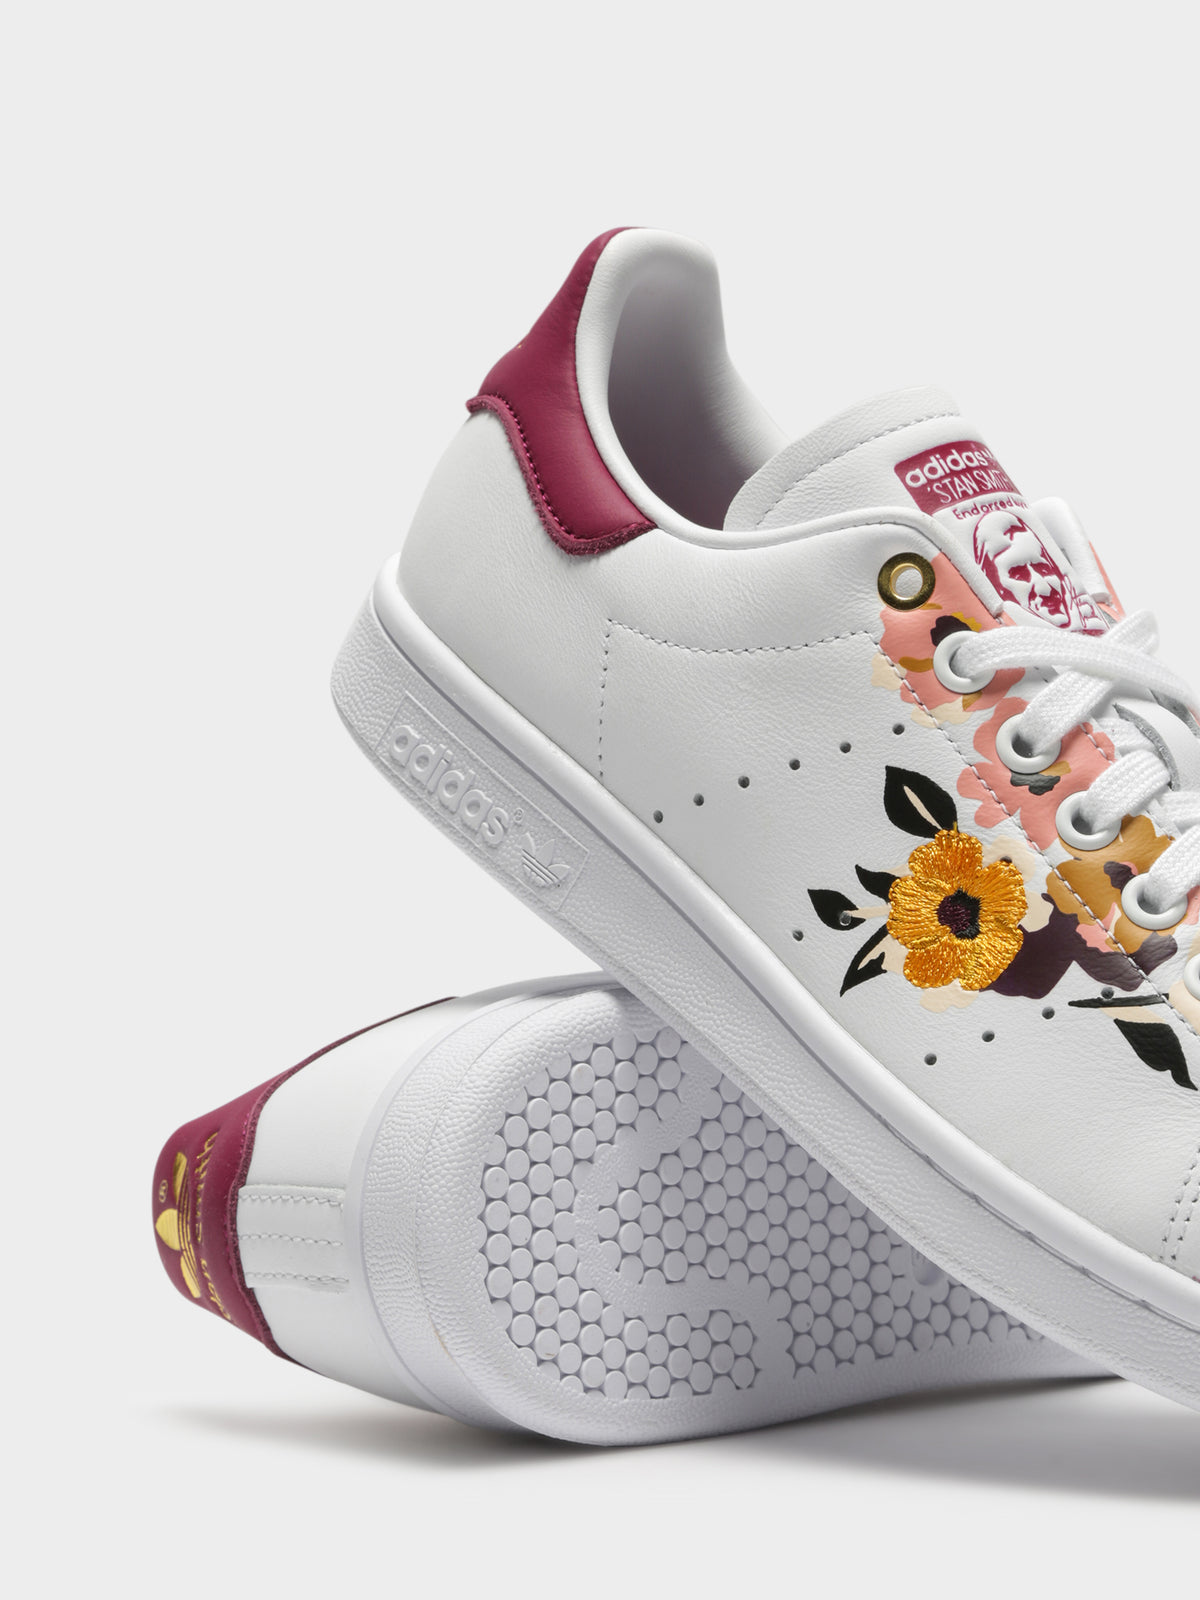 Womens Stan Smith Sneakers in Cloud White / Power Berry / Metallic Gold